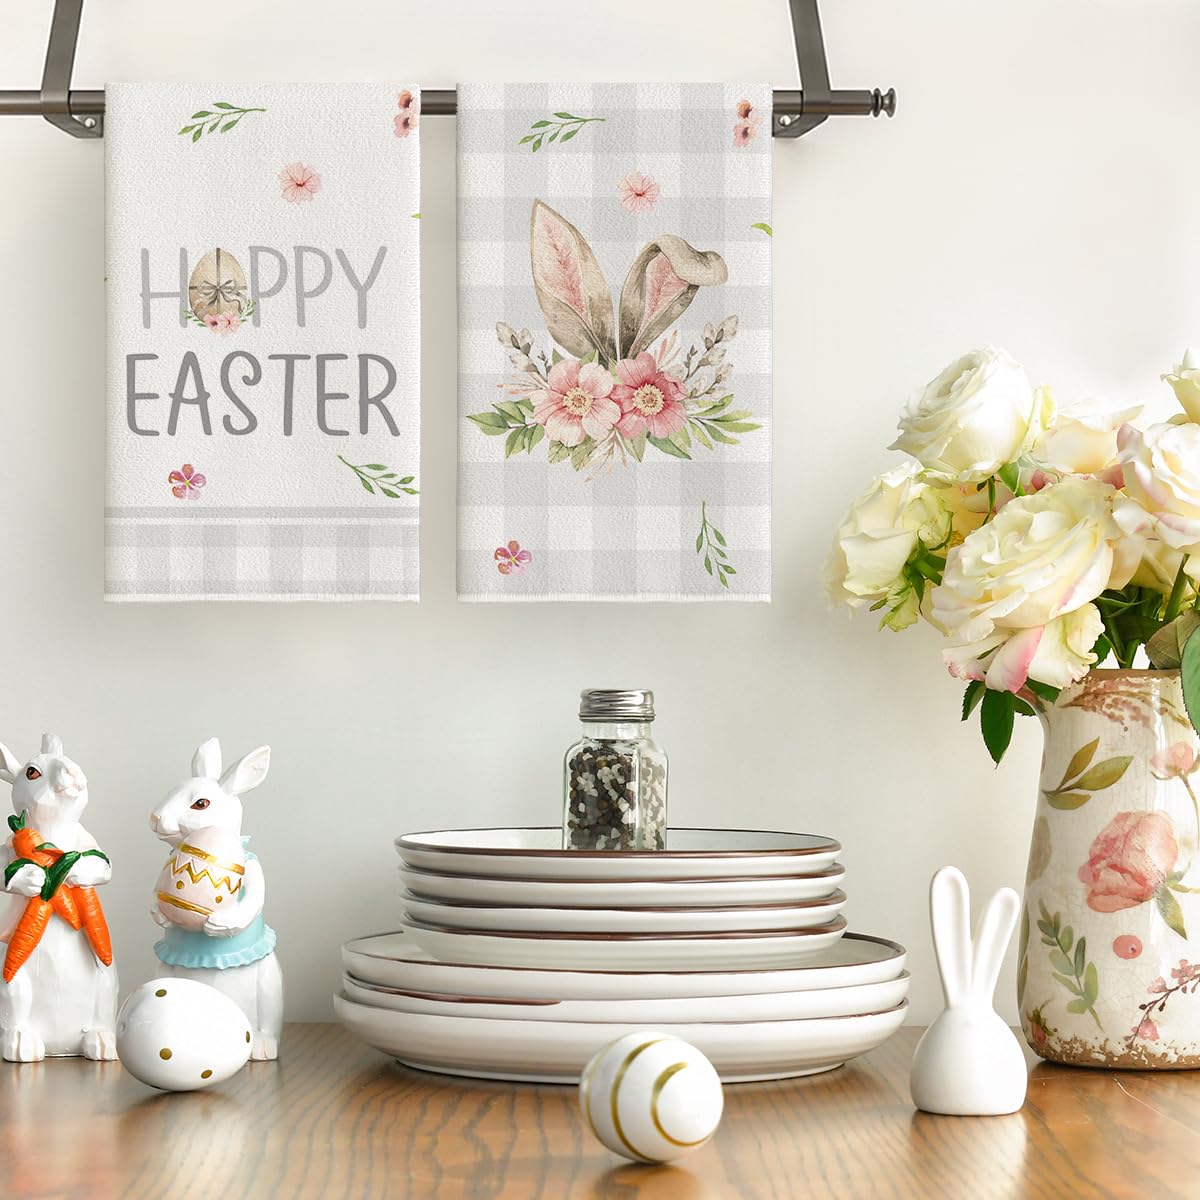 Artoid Mode Happy Easter Bunny Flower Kitchen Dish Towels, 18 x 26 Inch Seasonal Spring Easter Rabbit Ultra Absorbent Drying Cloth Tea Towels for Cooking Baking Set of 2